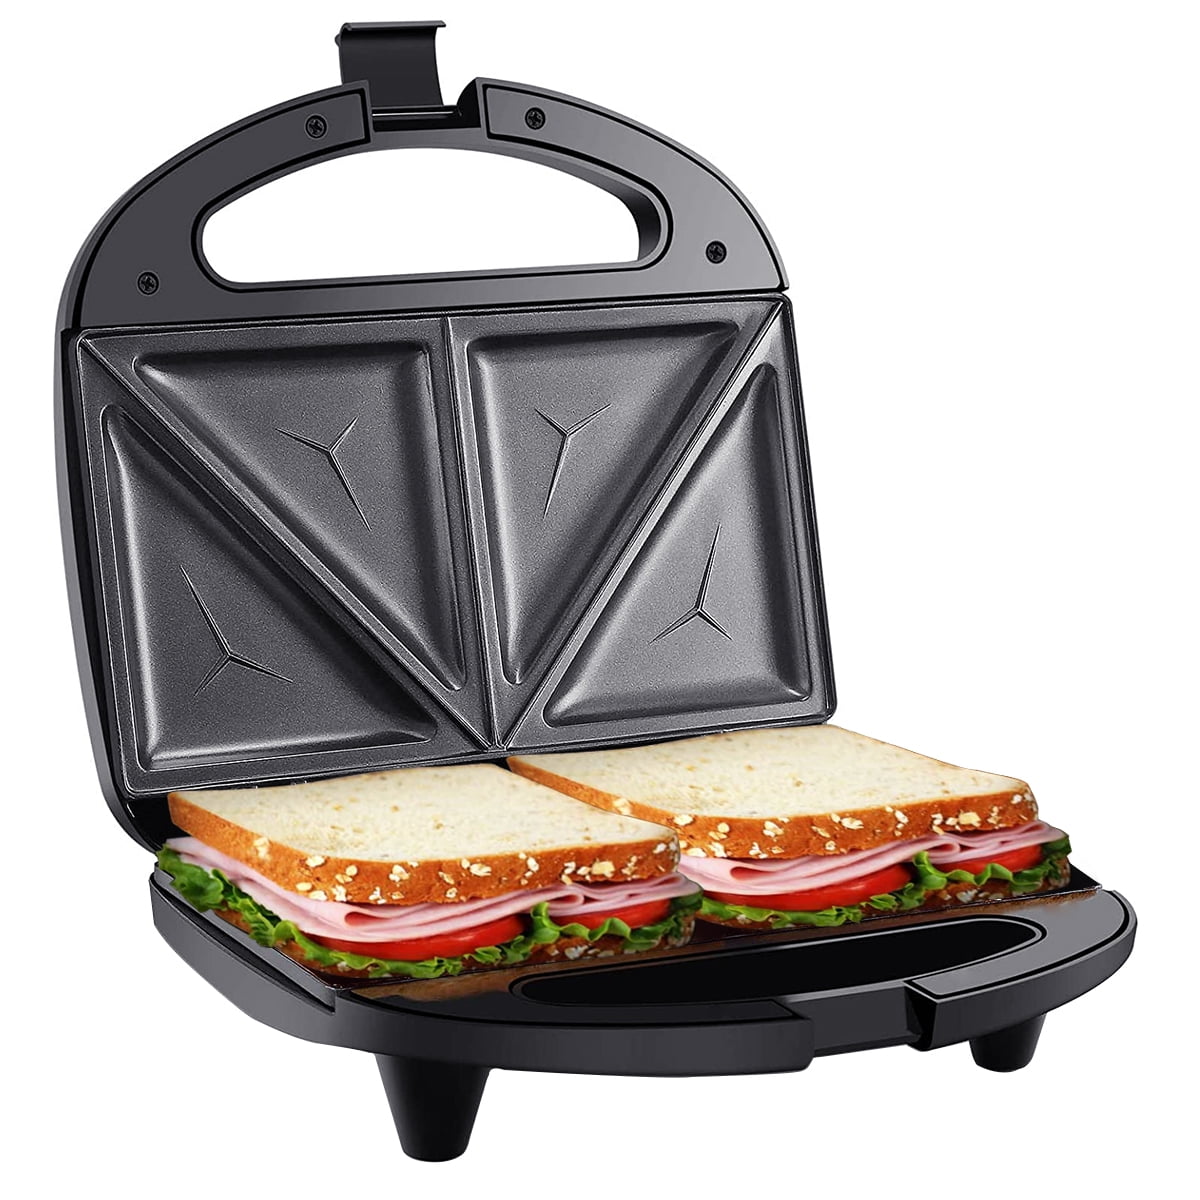 MONXOOK Panini Maker, 750W Sandwiches Maker, Double Sided Non-Stick Plates,  Auto Temp Control, Cold-touch handle, Indicator Lights, for Hot Sandwiches,  Burgers, Chicken, Easy Cleaning 